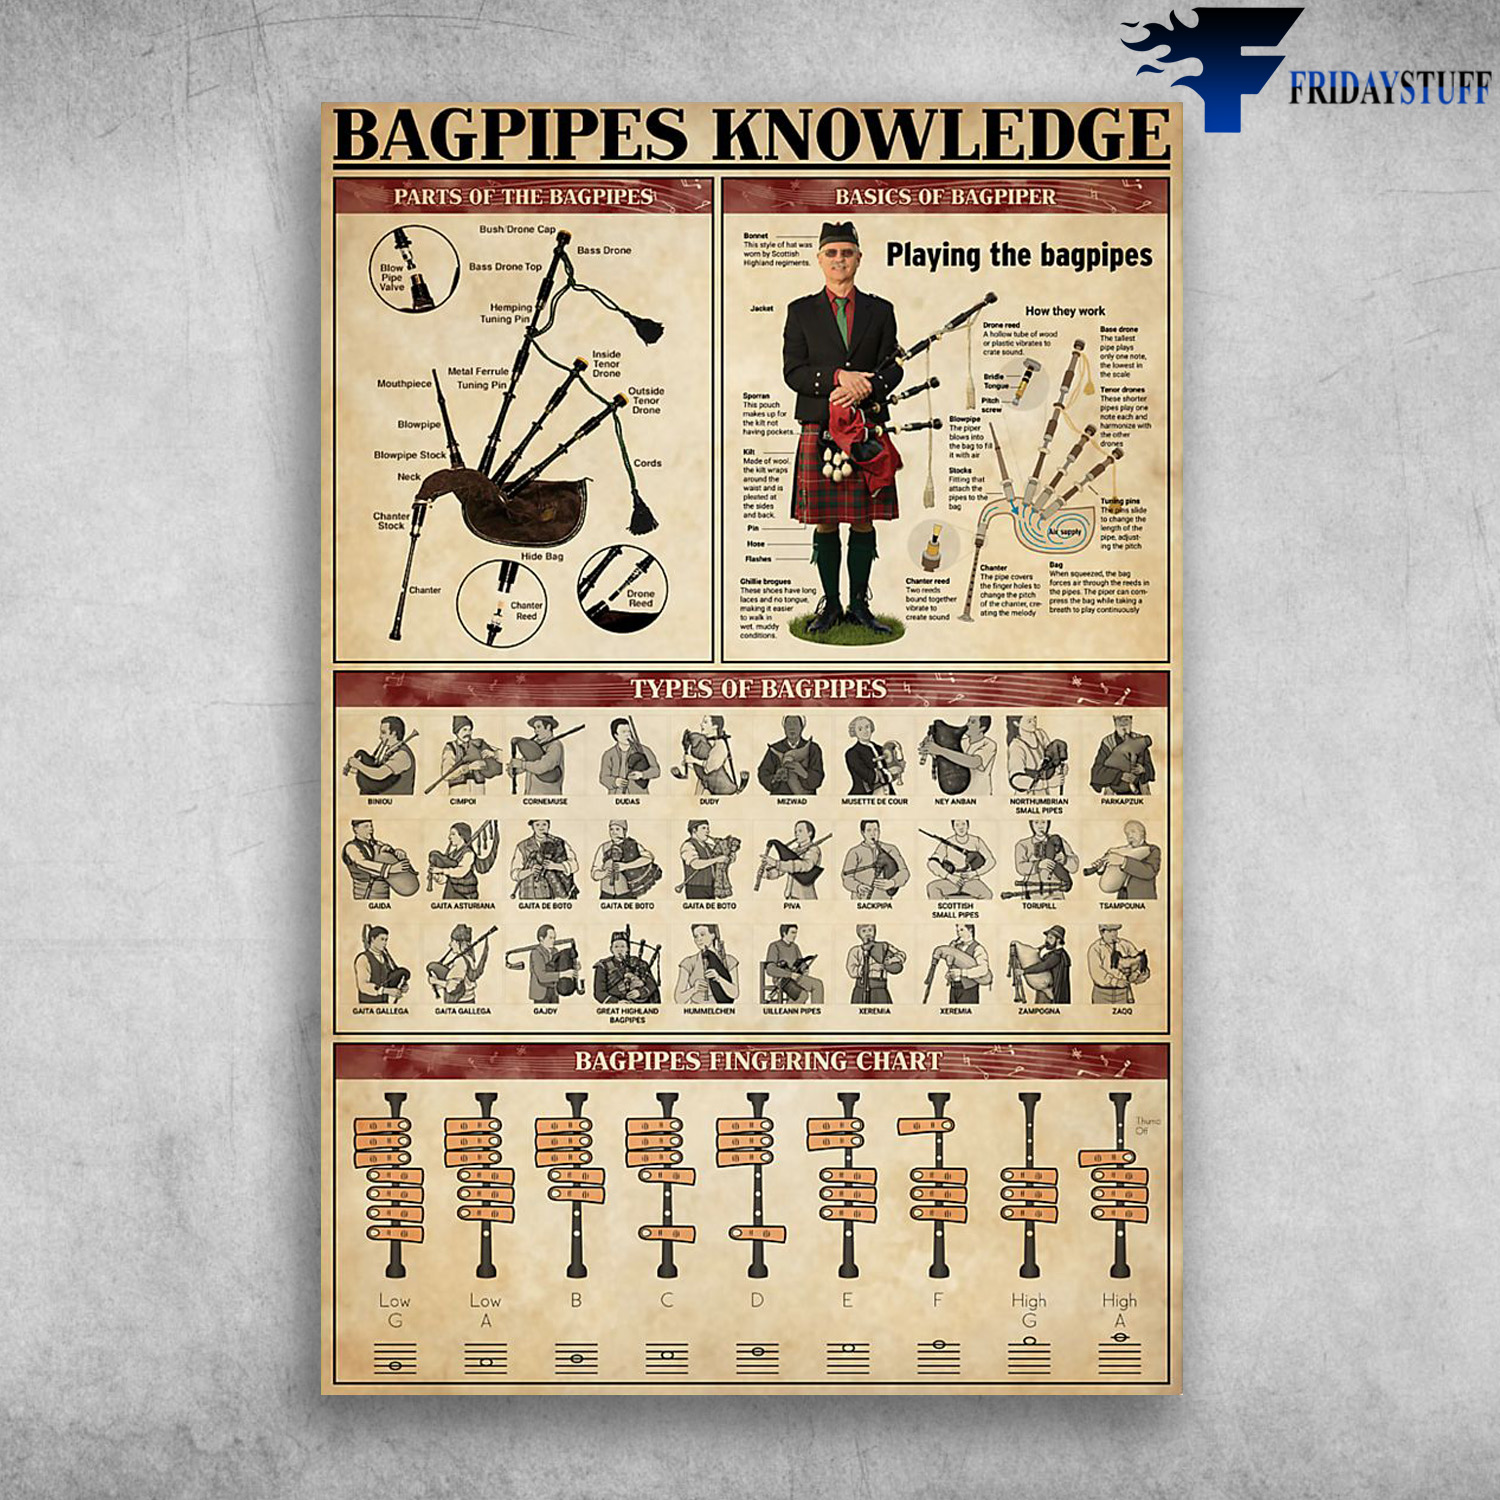 Bagpipes Knowledge Parts Of The Bagpipes Basics Of Bagpiper